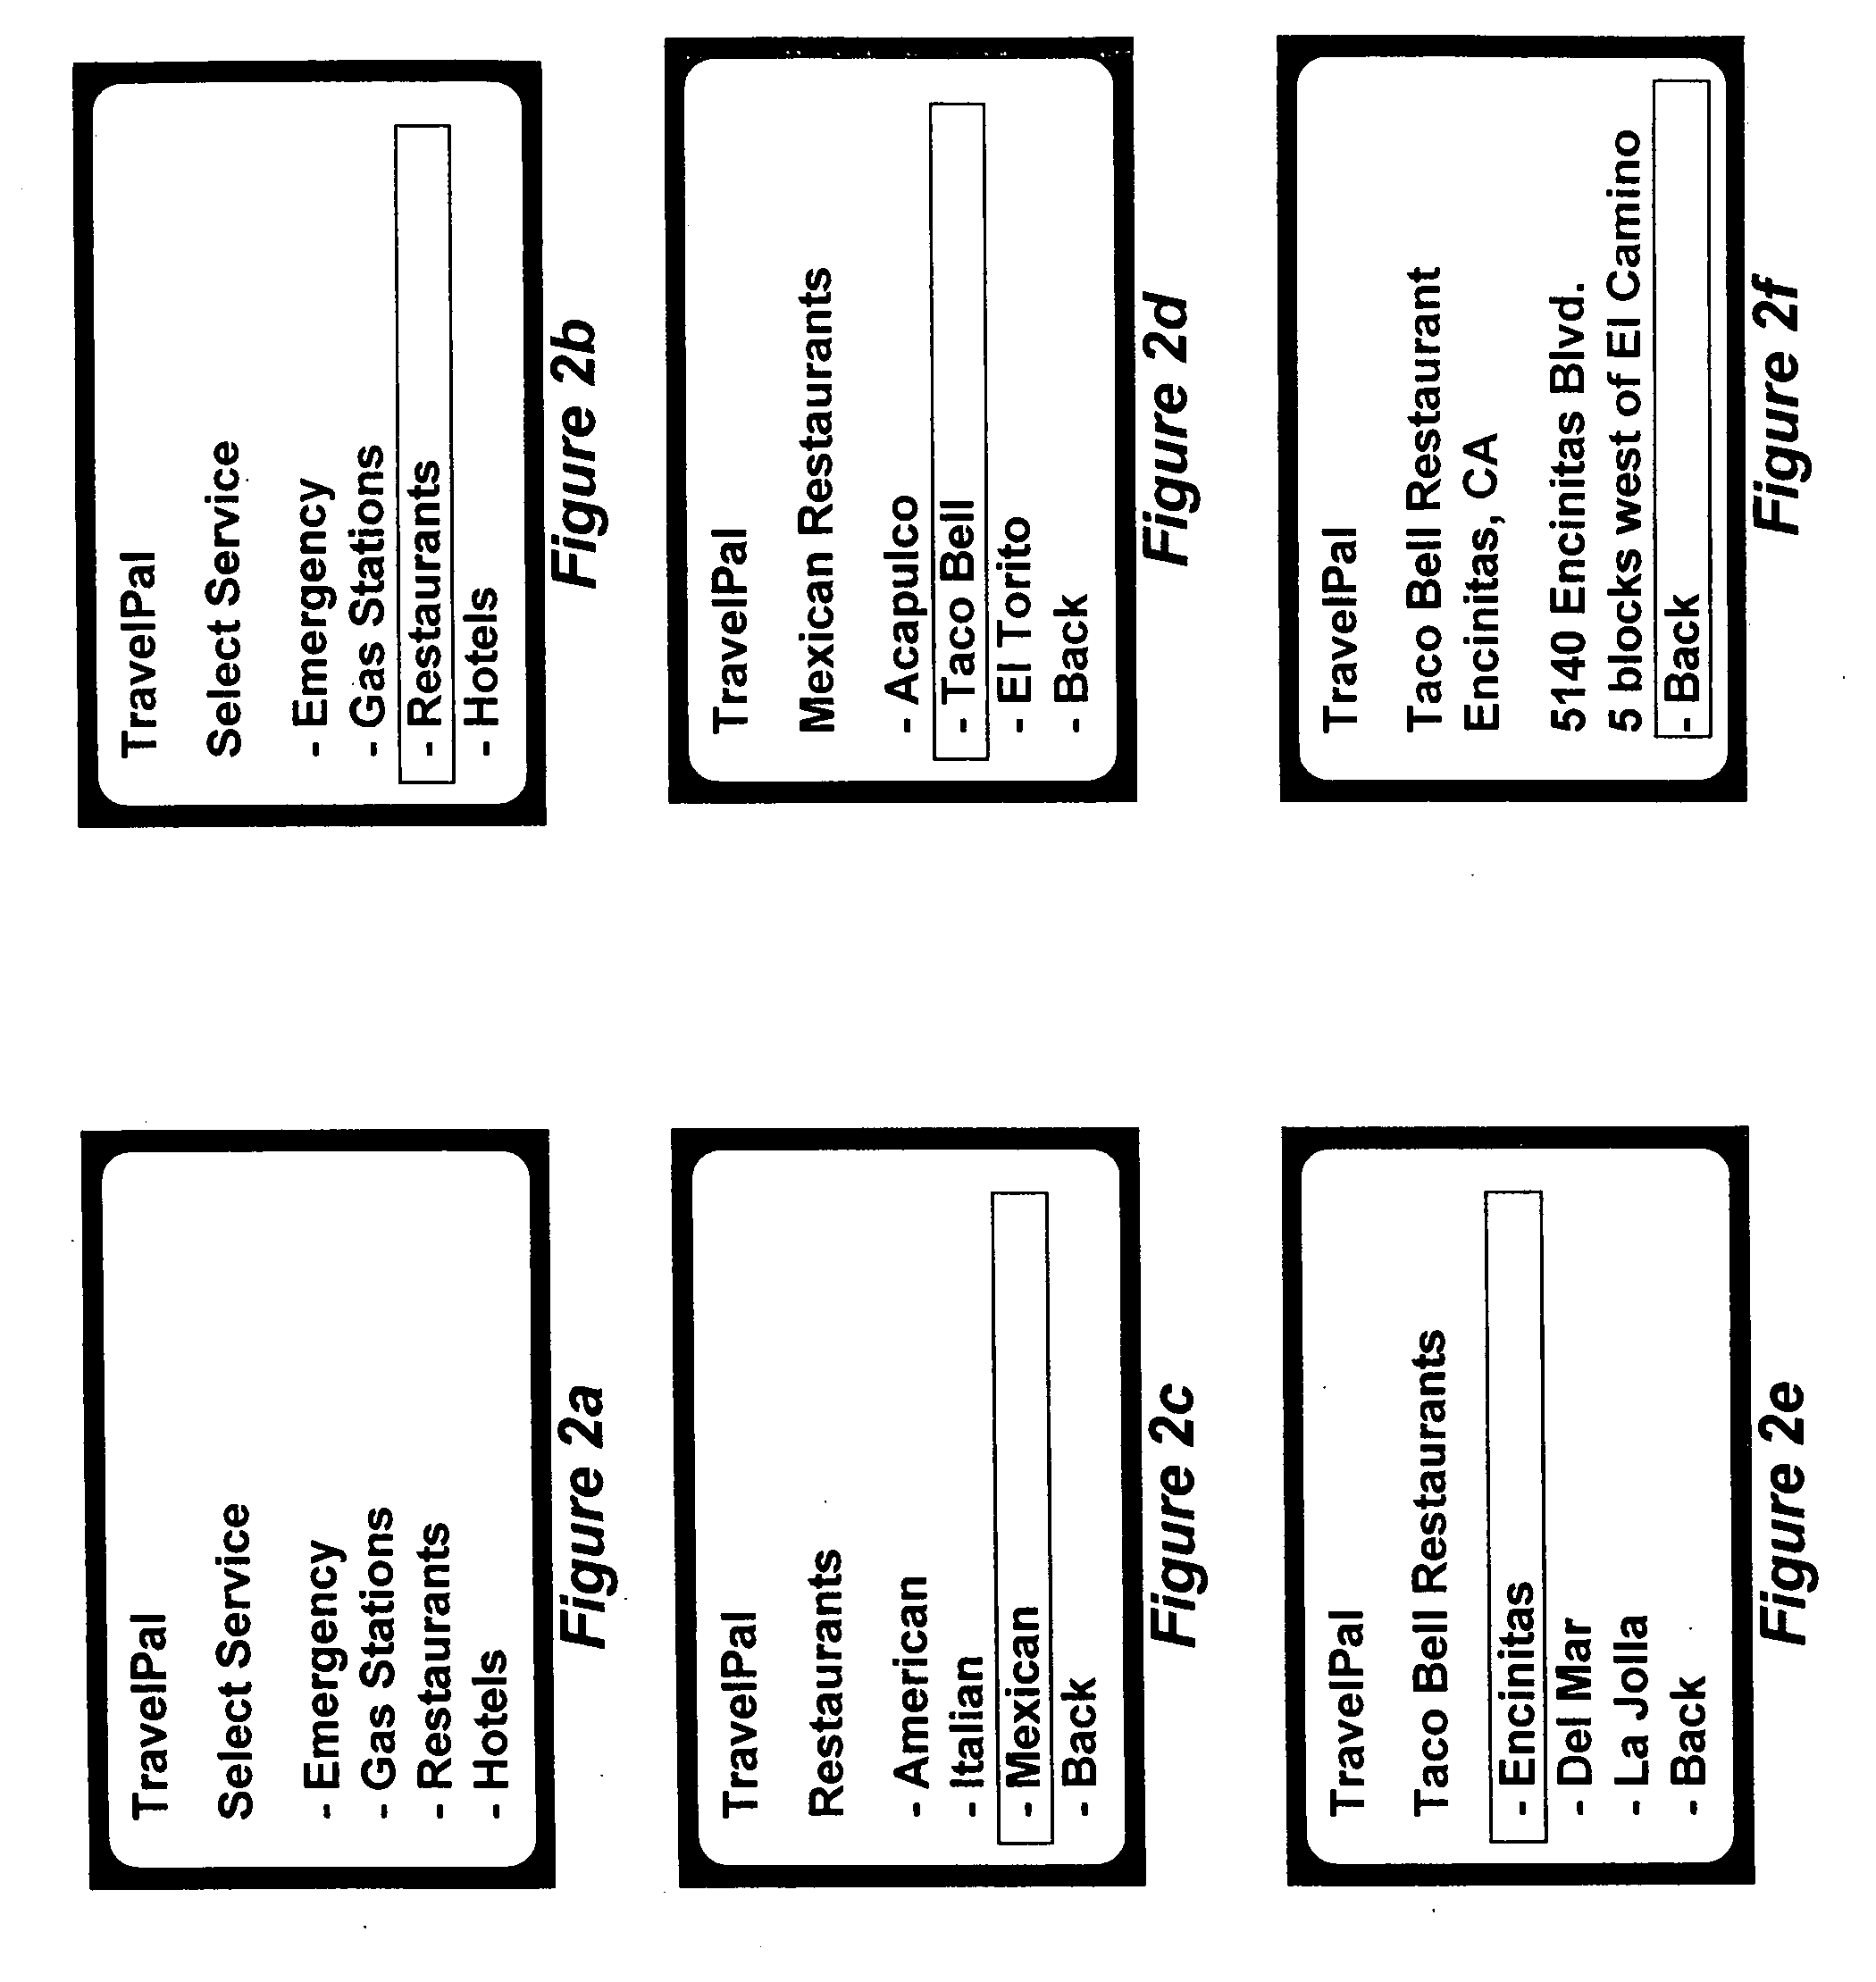 System and method for flexible user interfaces